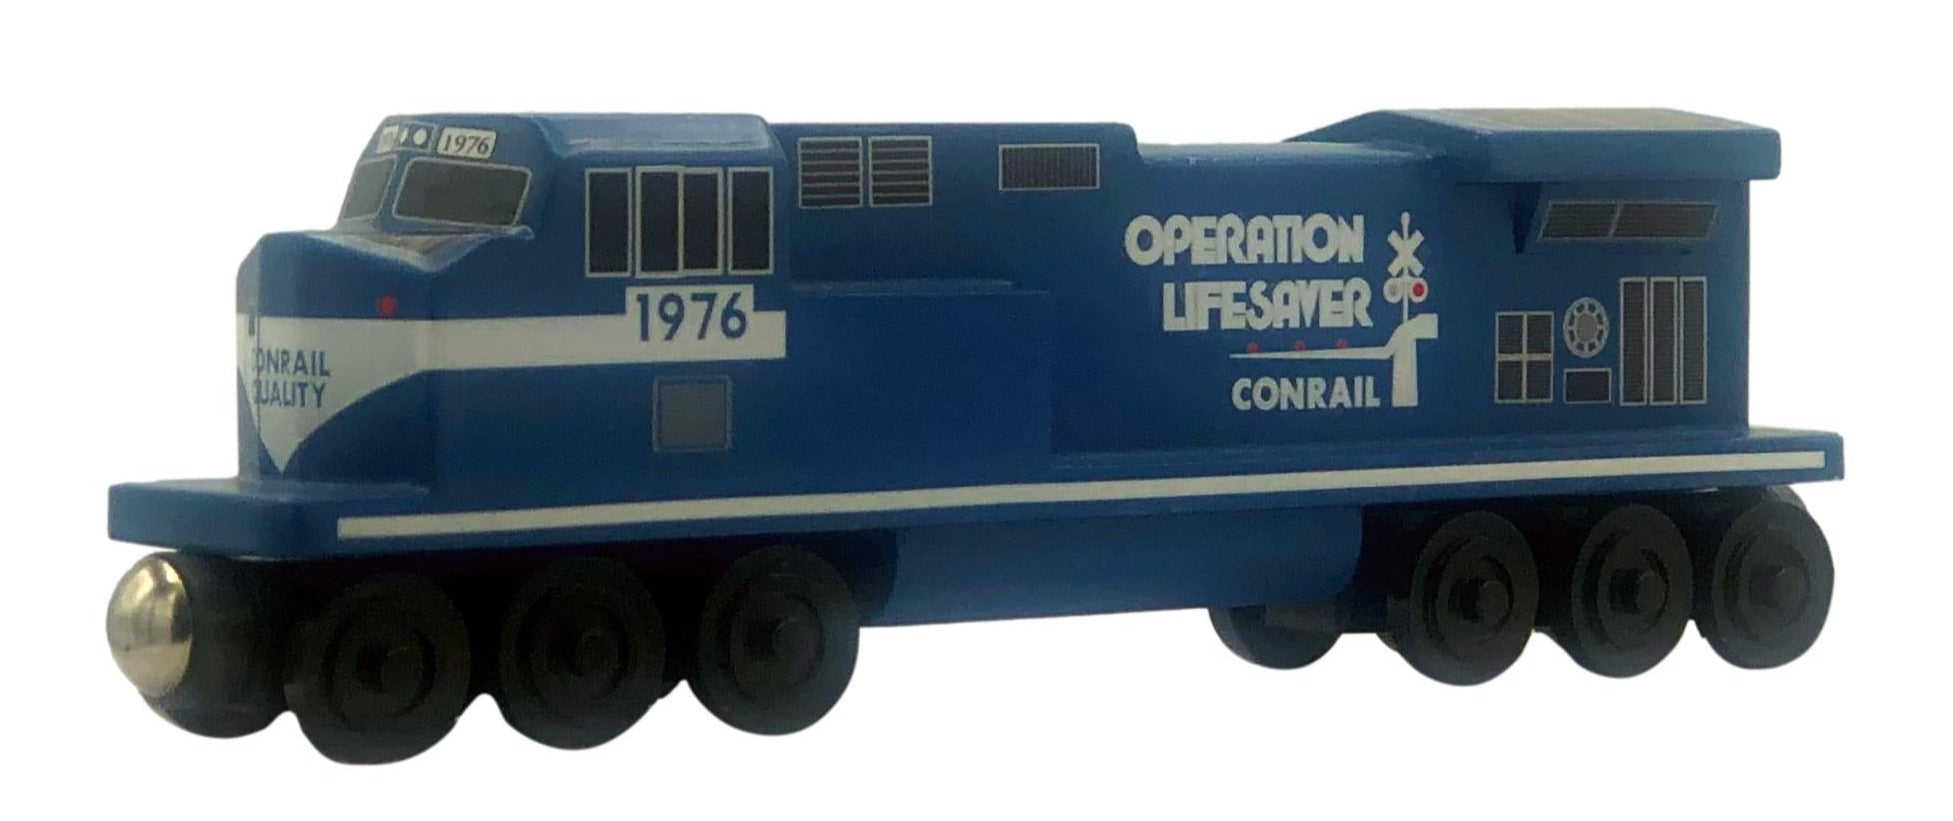 Conrail Operation Lifesaver C44 Engine wooden toy train by Whittle Shortline Railroad